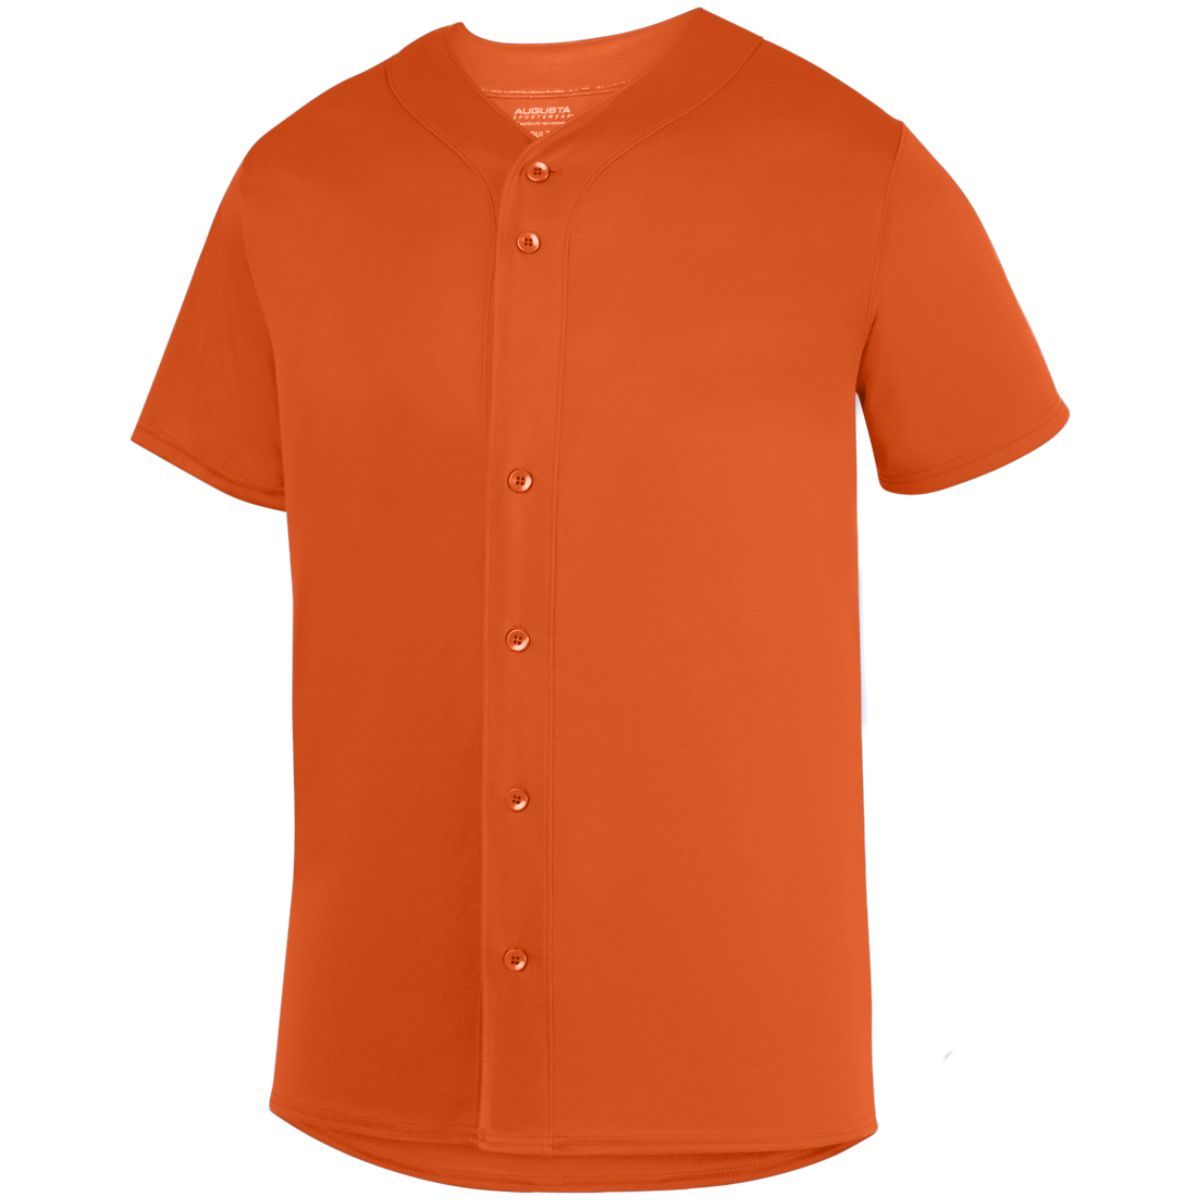 Augusta Sportswear Youth Sultan Jersey in Orange  -Part of the Youth, Youth-Jersey, Augusta-Products, Baseball, Shirts, All-Sports, All-Sports-1 product lines at KanaleyCreations.com